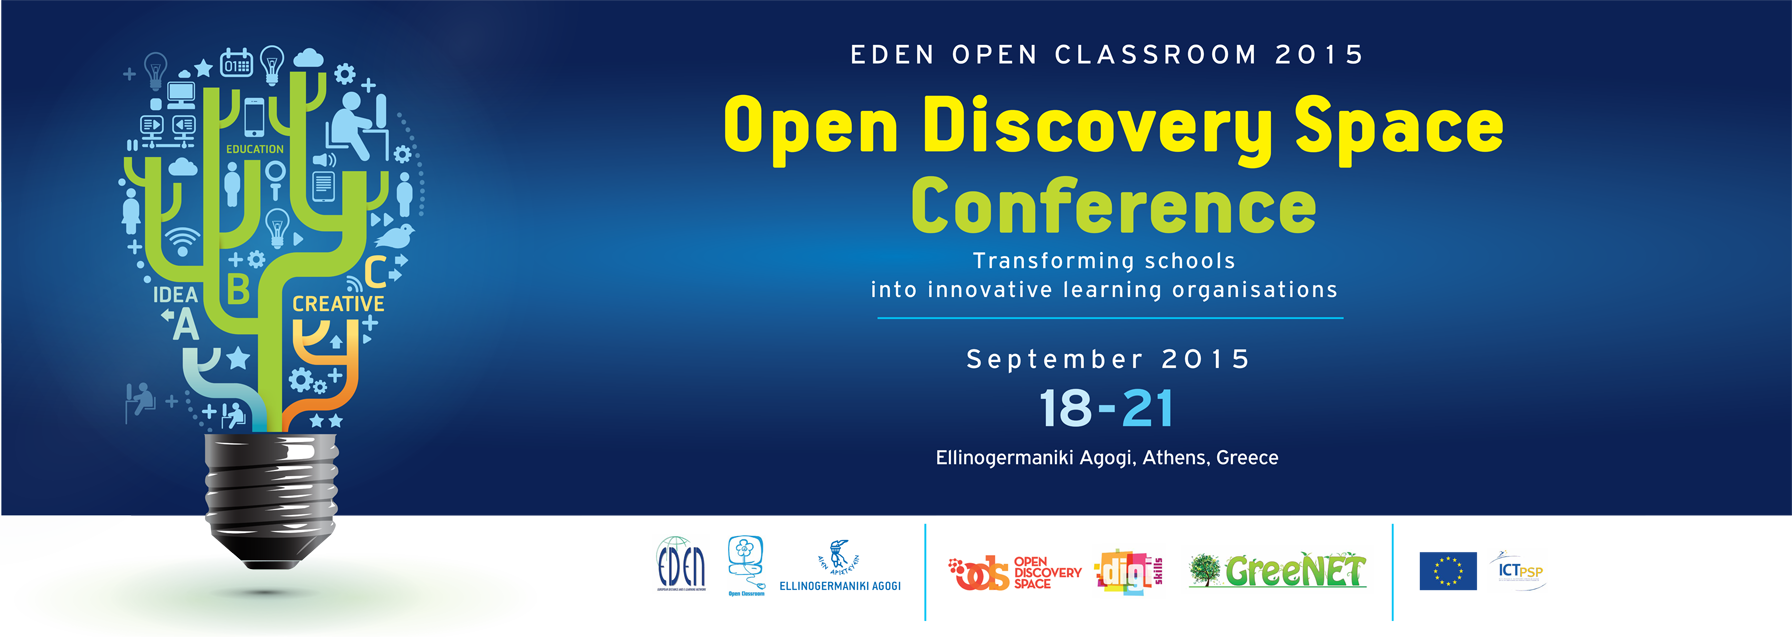 2015 Athens Open Discovery Space Conference